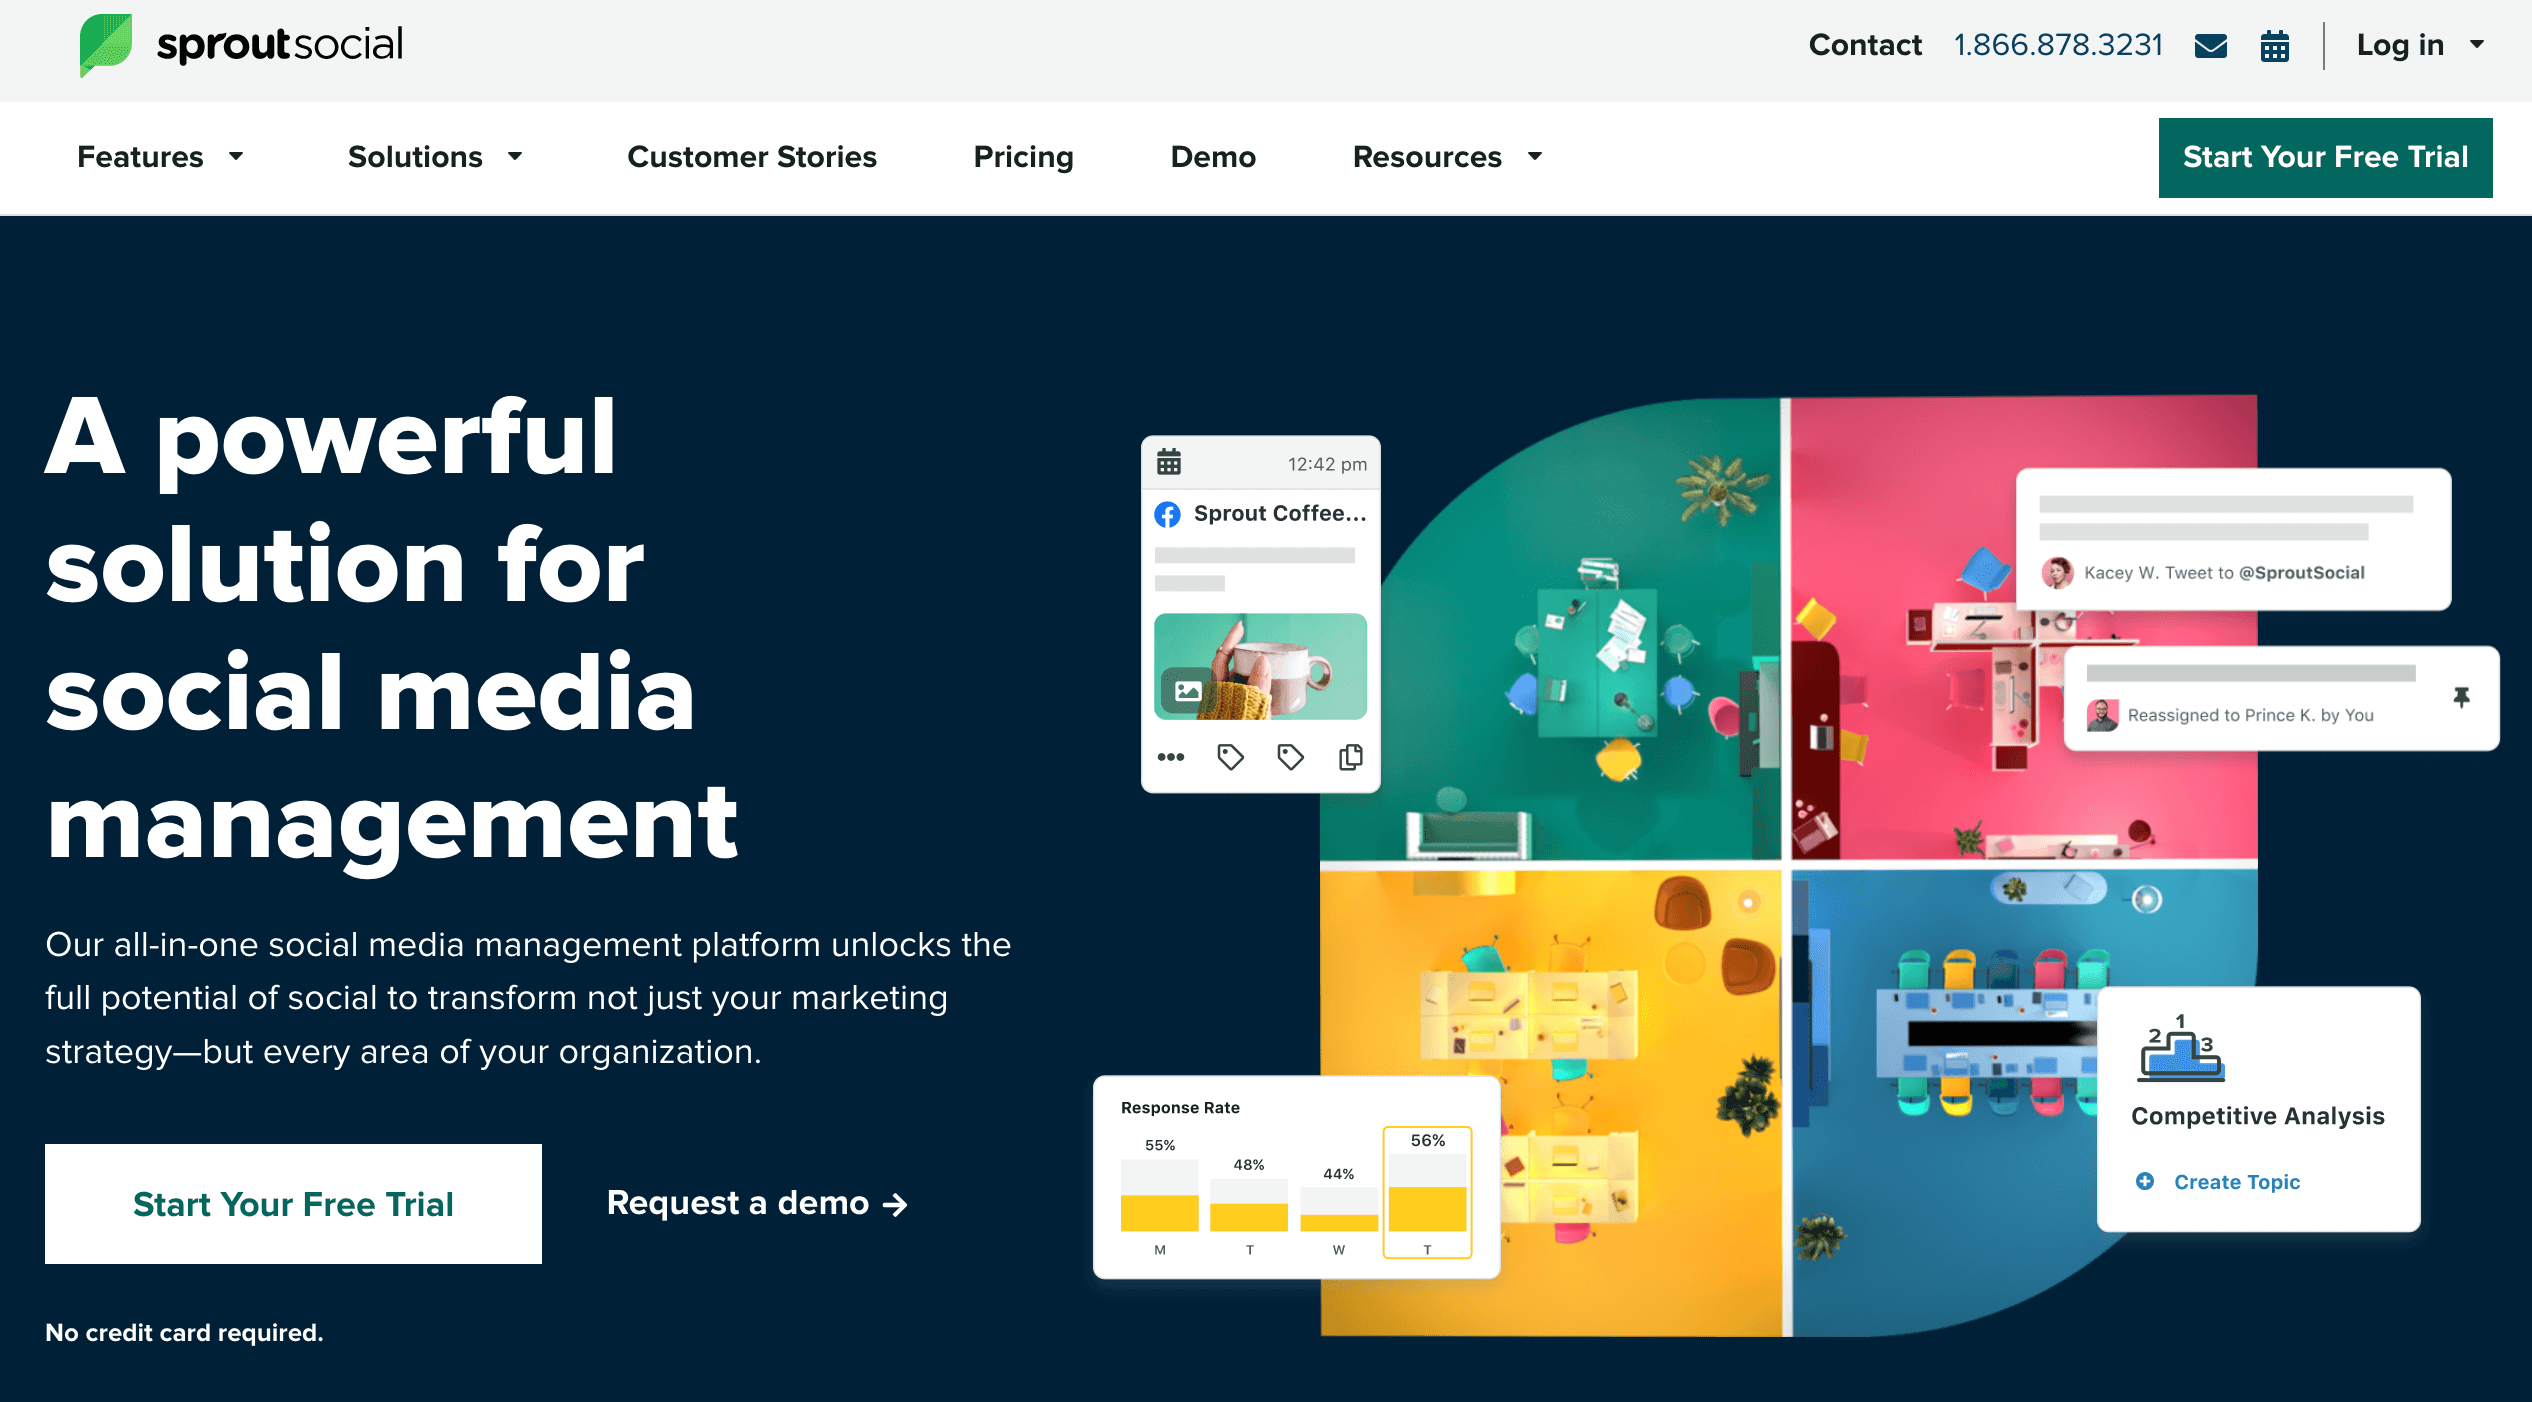 Sprout Social's home page